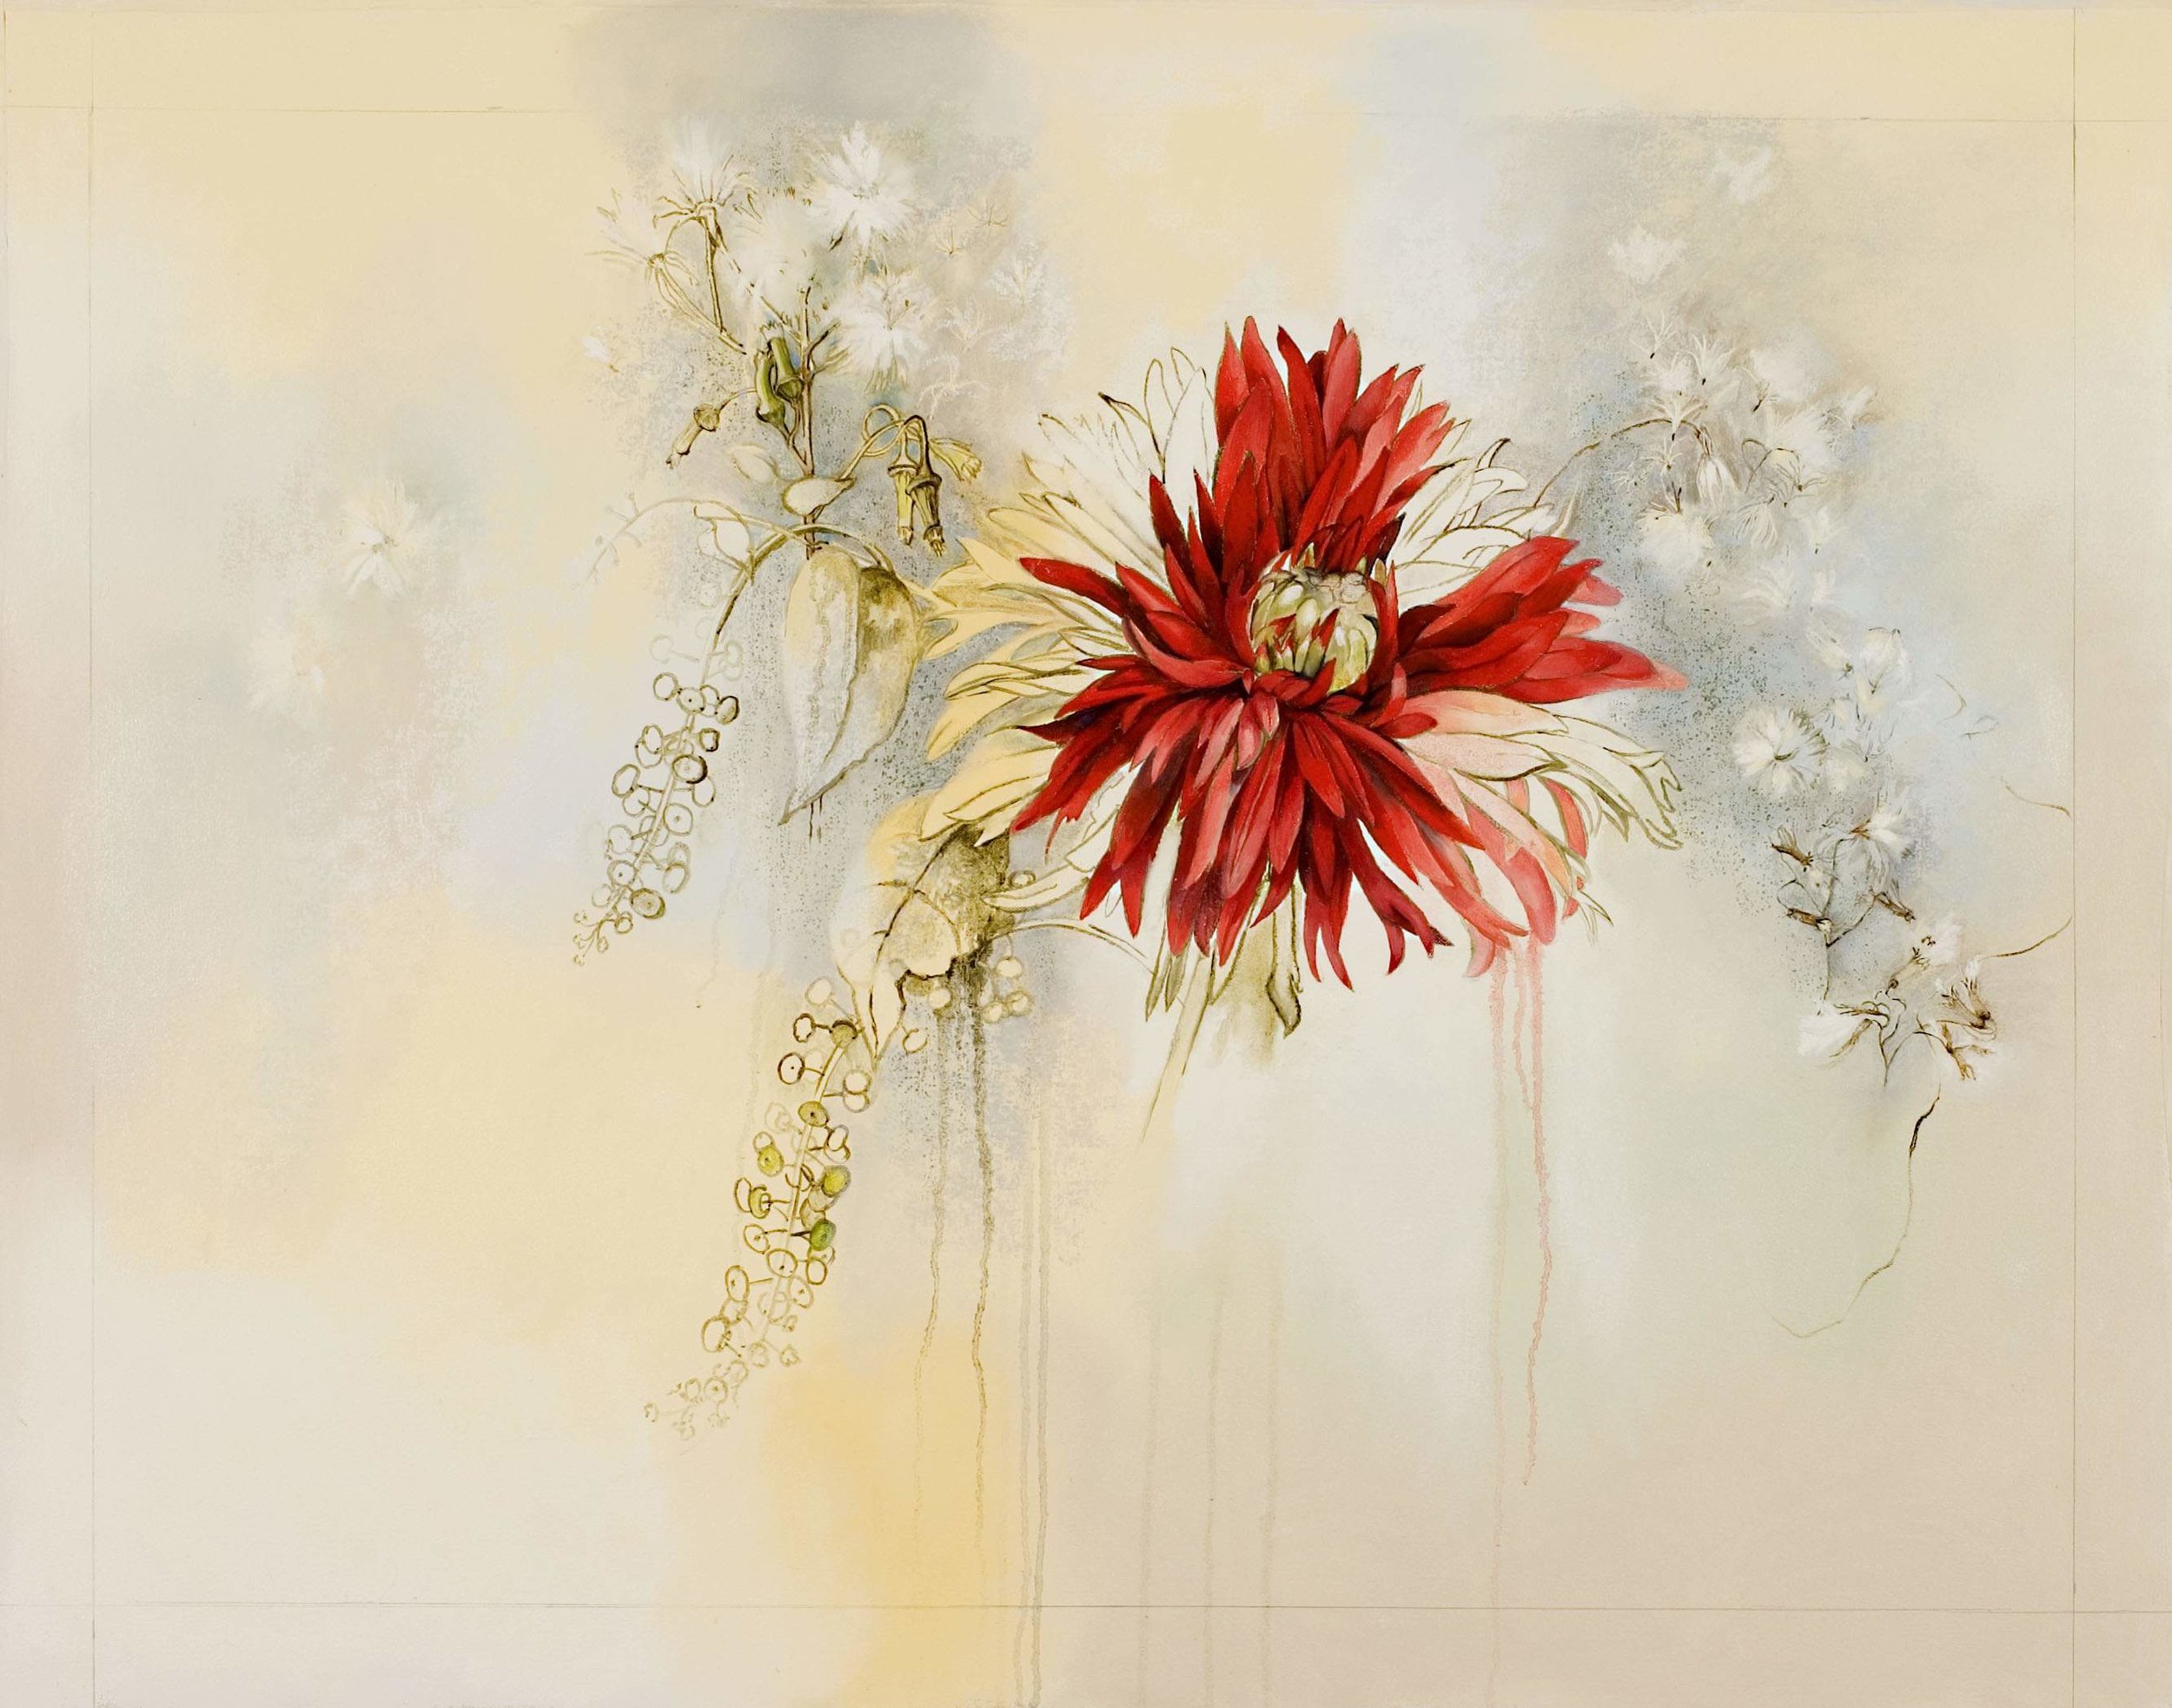 Dahlia disappearing in the weeds , oil and oil stick on canvas, 28 x 37 inches, 2006